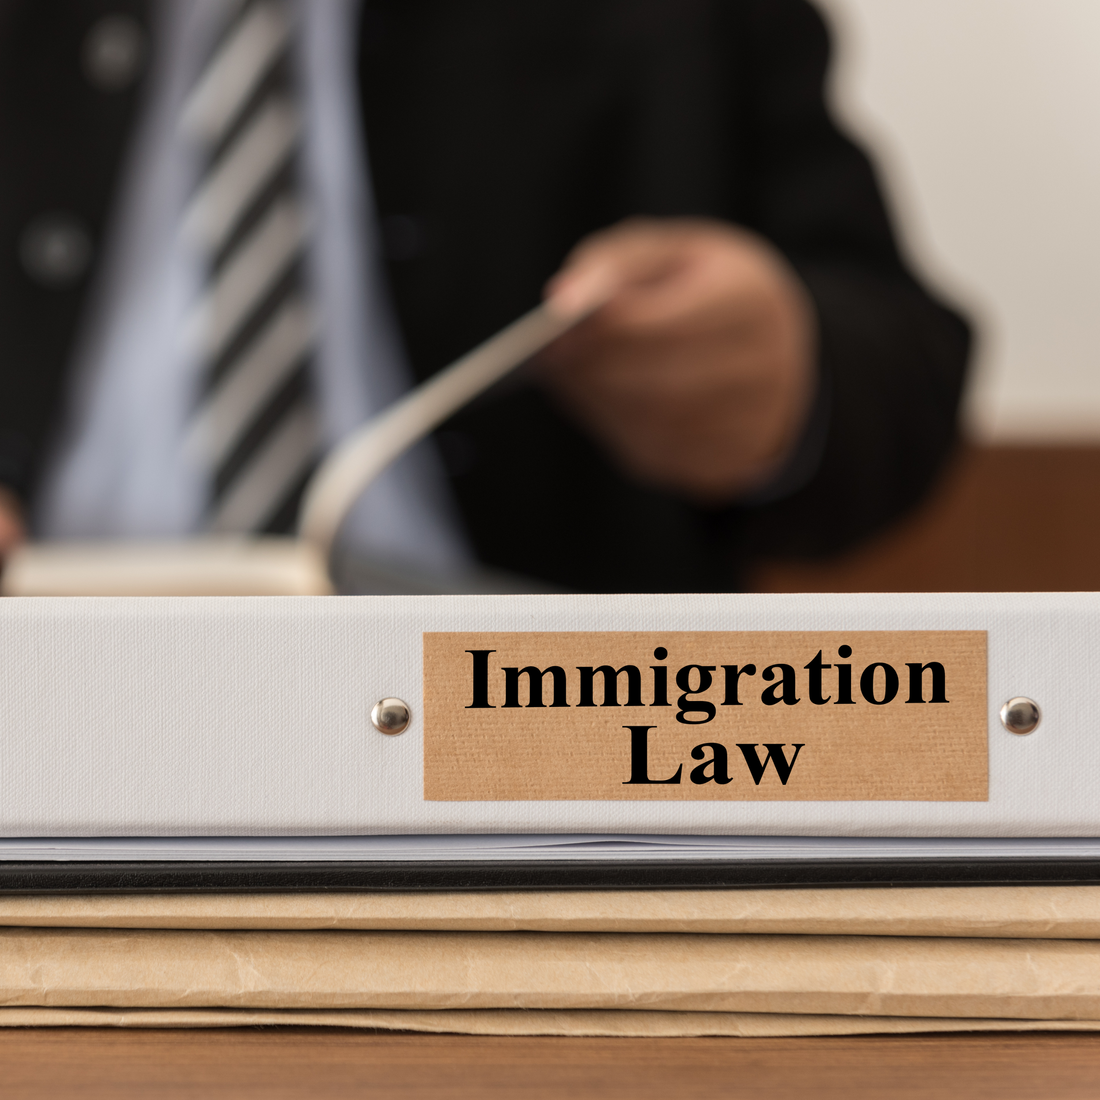 Immigration Lawyers Experts and Consultants Marketing Strategies